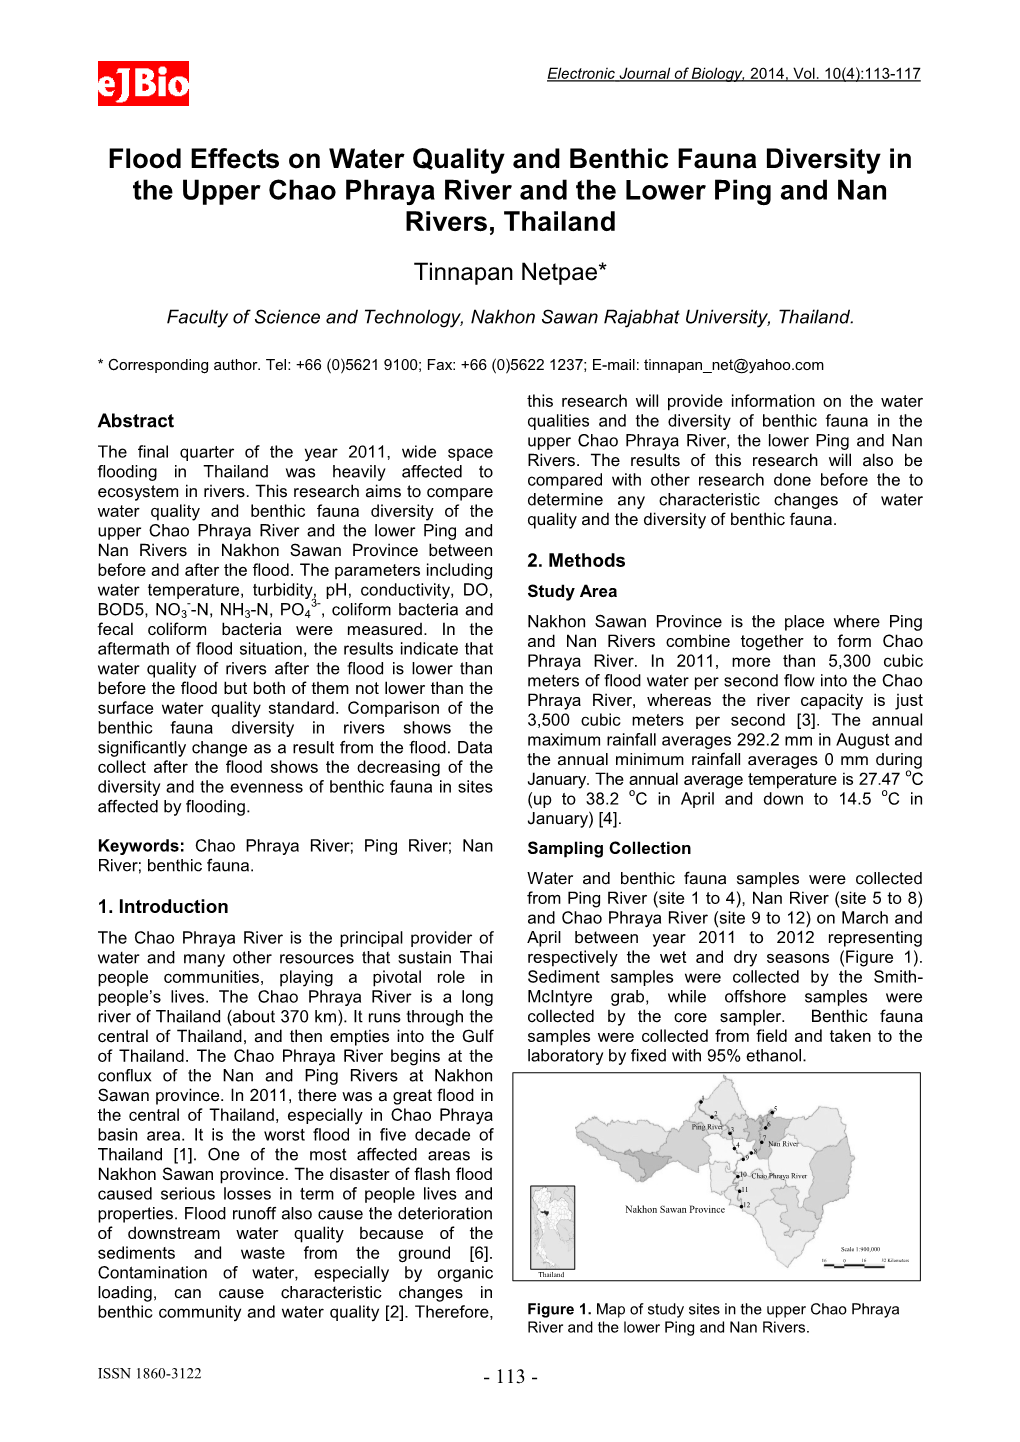 Flood Effects on Water Quality and Benthic Fauna Diversity in the Upper Chao Phraya River and the Lower Ping and Nan Rivers, Thailand